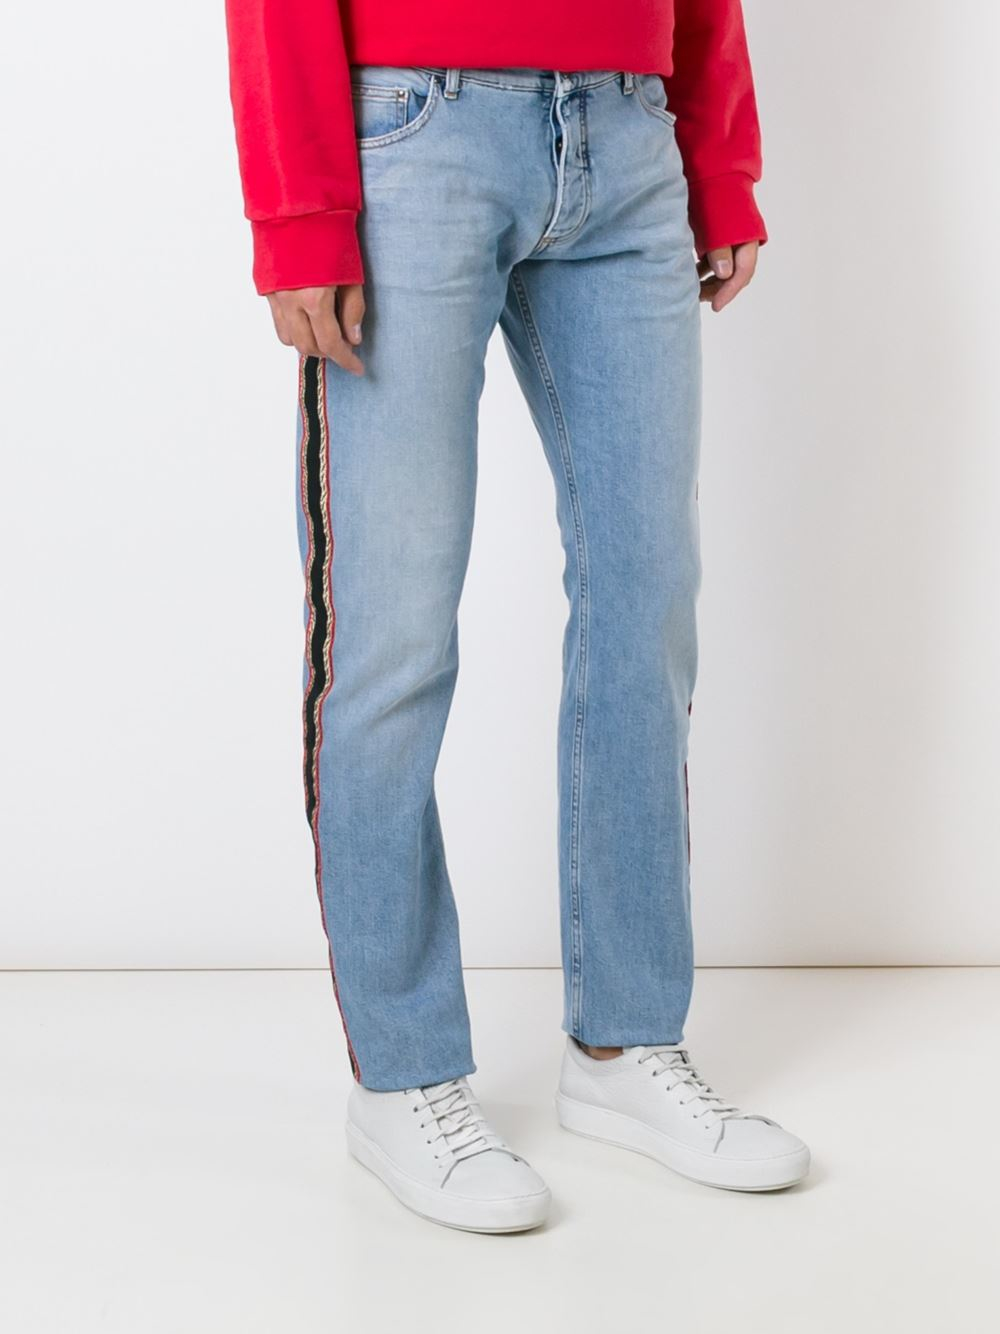 mens jeans with side stripe